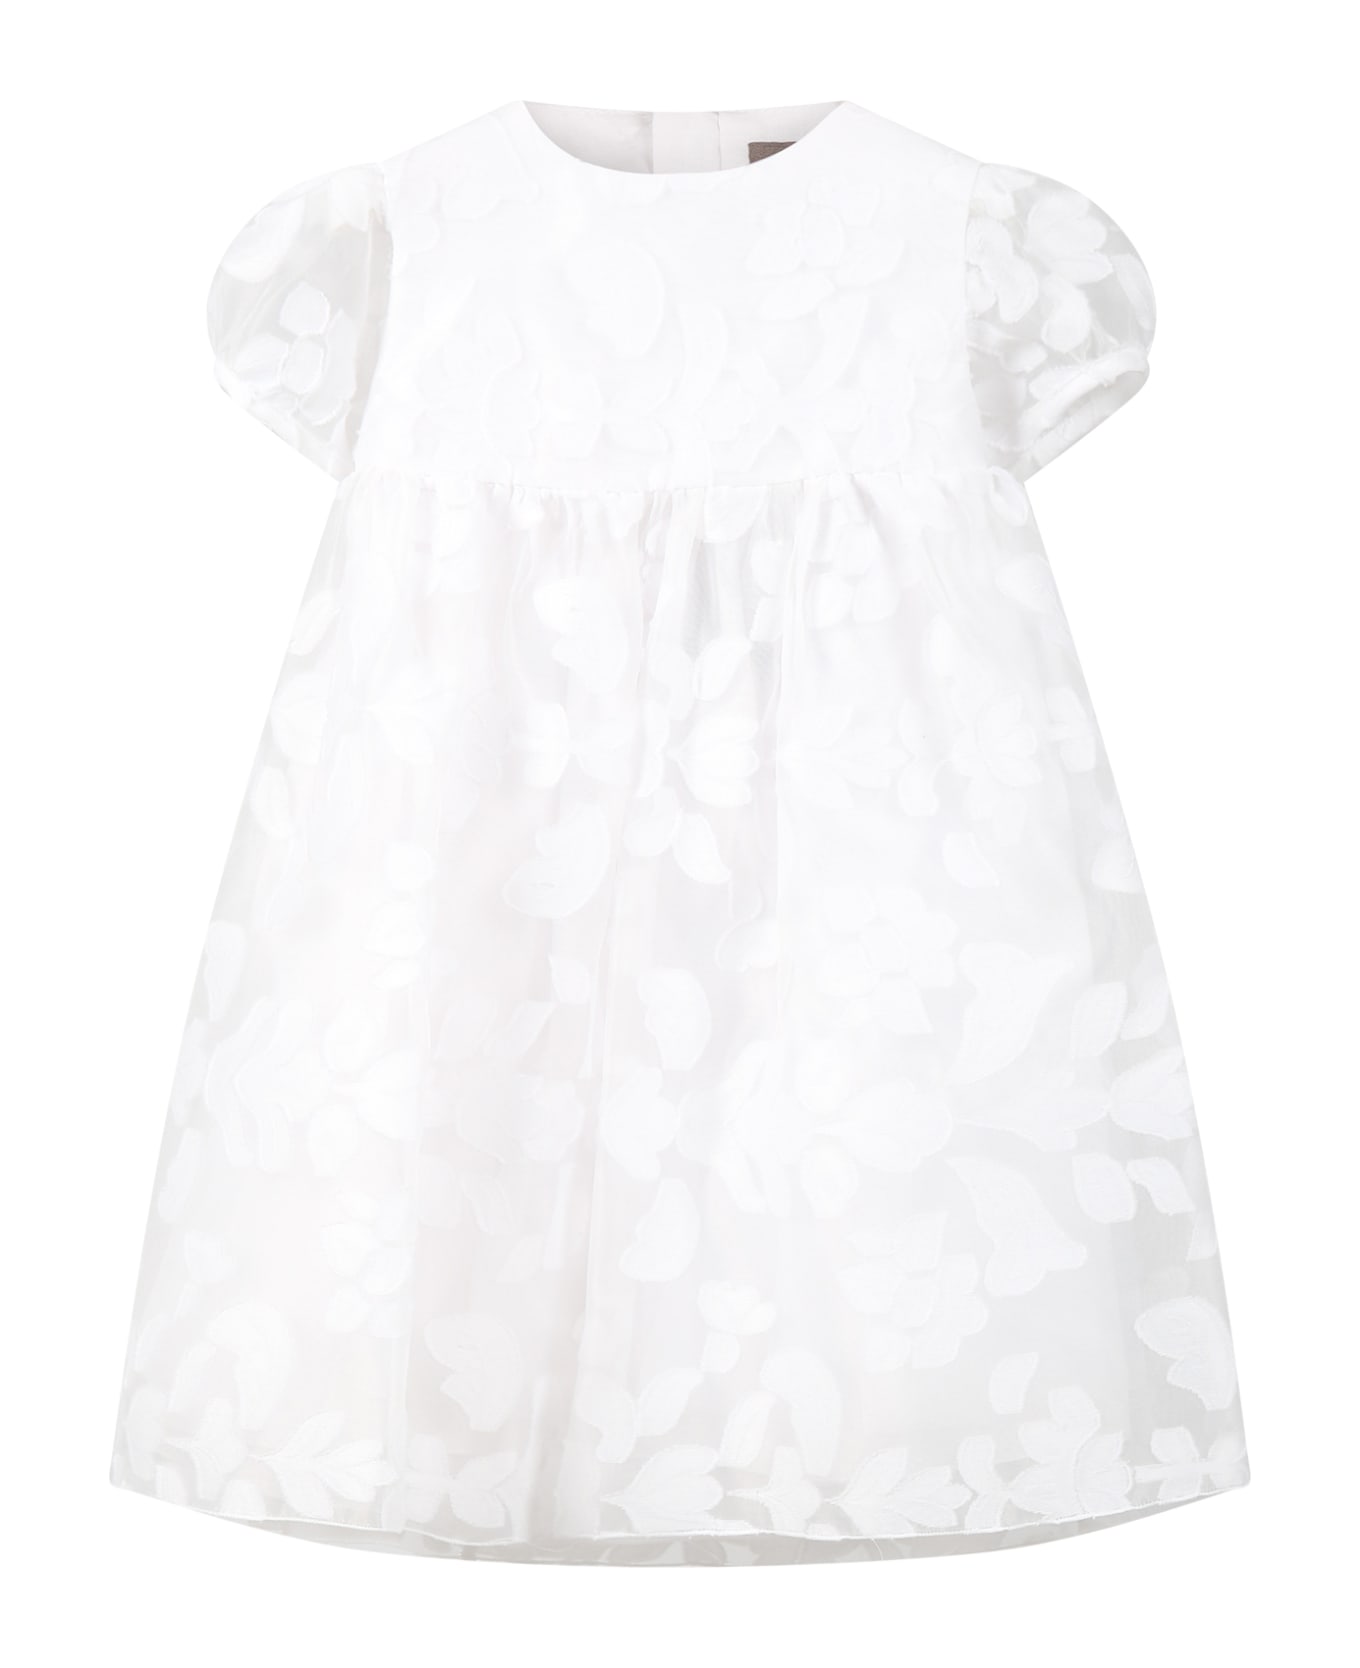 Little Bear White Dress For Baby Girl With Floral Details - White